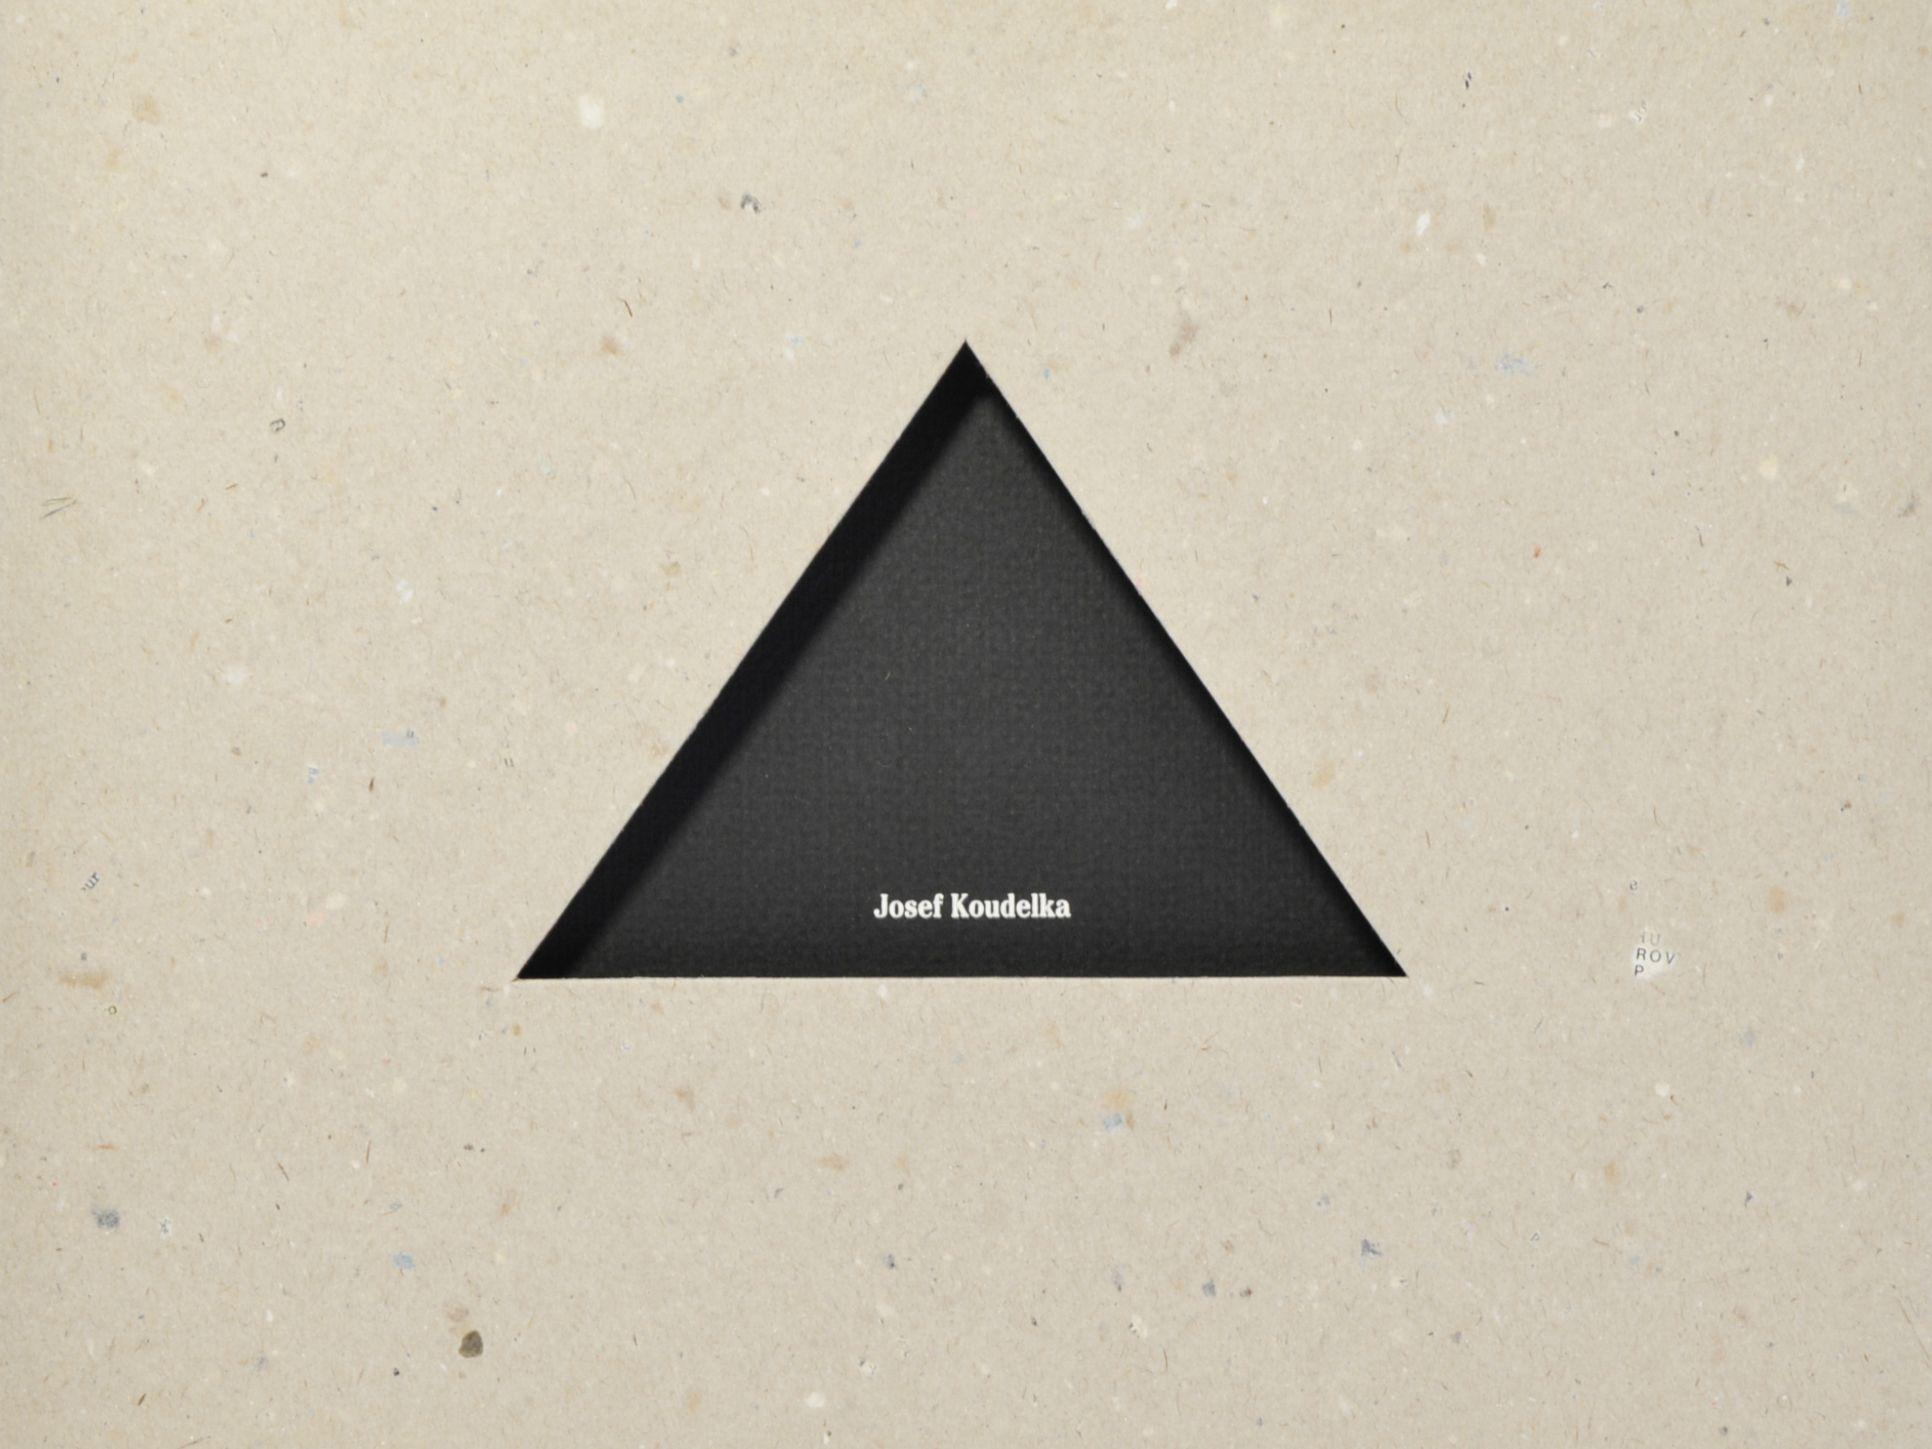 Black Triangle Pyramid Logo - Josef Koudelka - The Black Triangle - The Foothills of the Ore ...